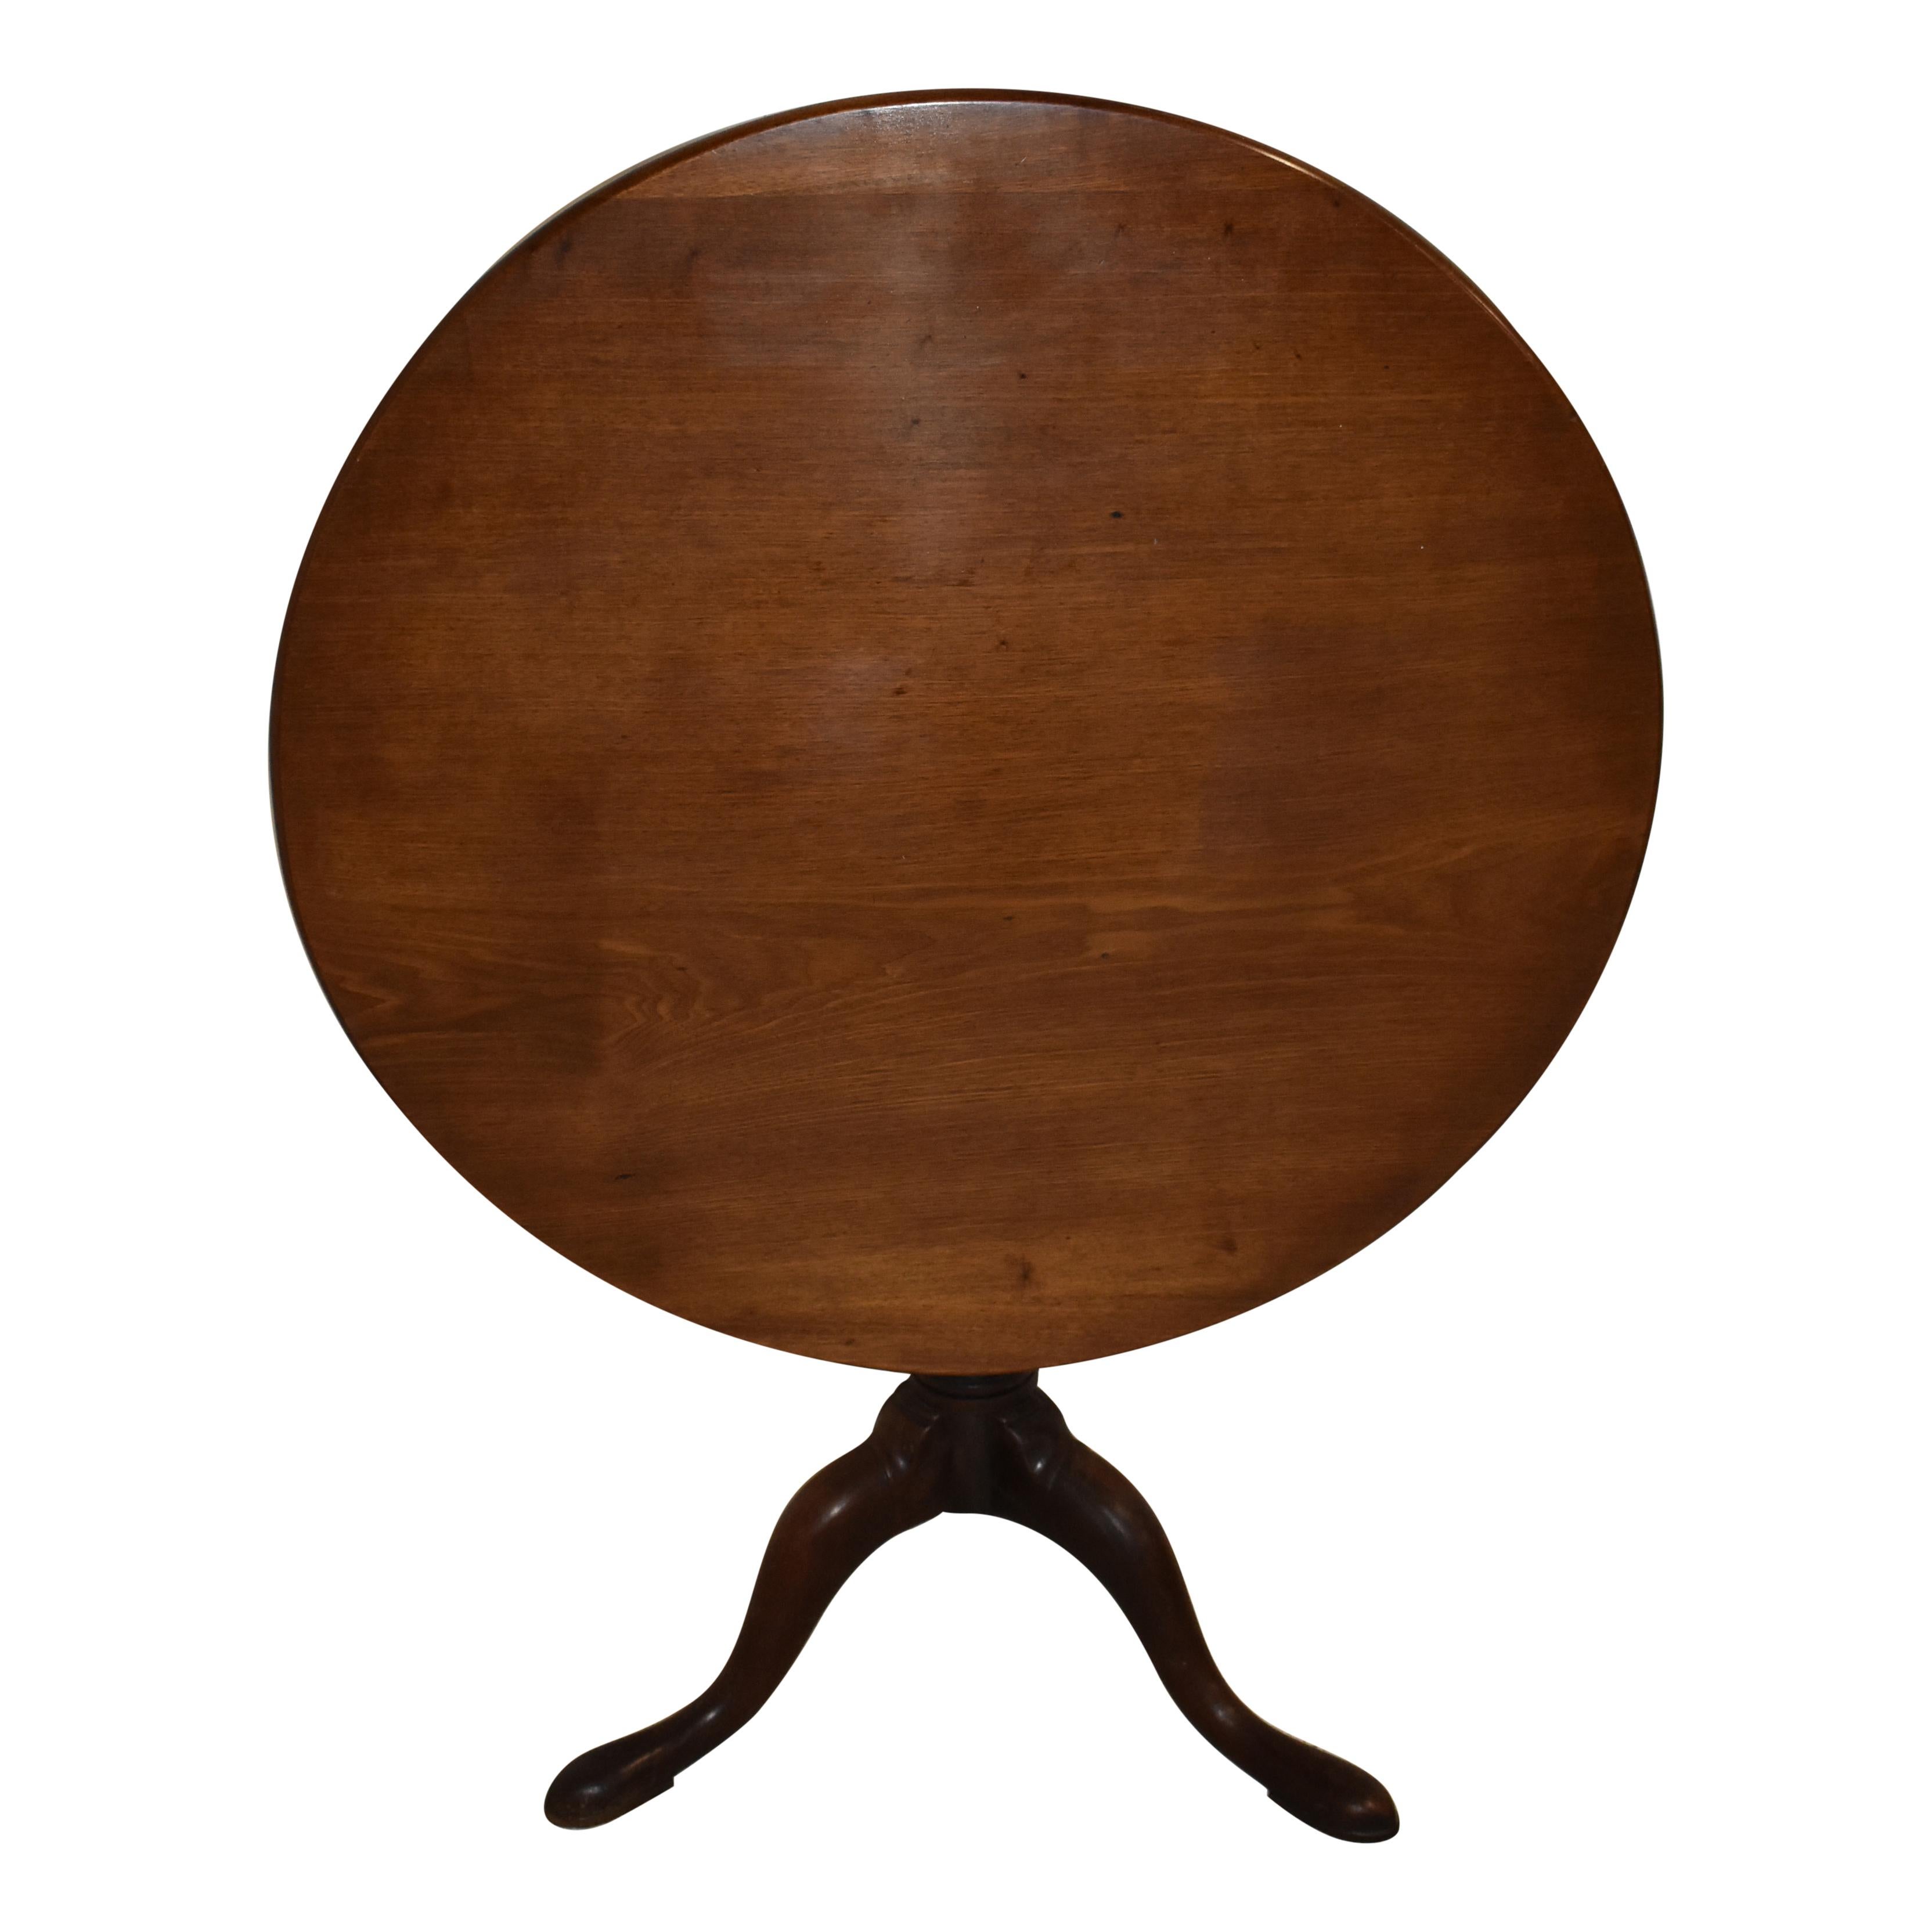 This Classic tilt-top table features a round top over a birdcage mechanism that allows the table's top to be tilted up when not in use. The top is supported by a turned pedestal with tripod cabriole legs that dovetail into the pedestal, which is